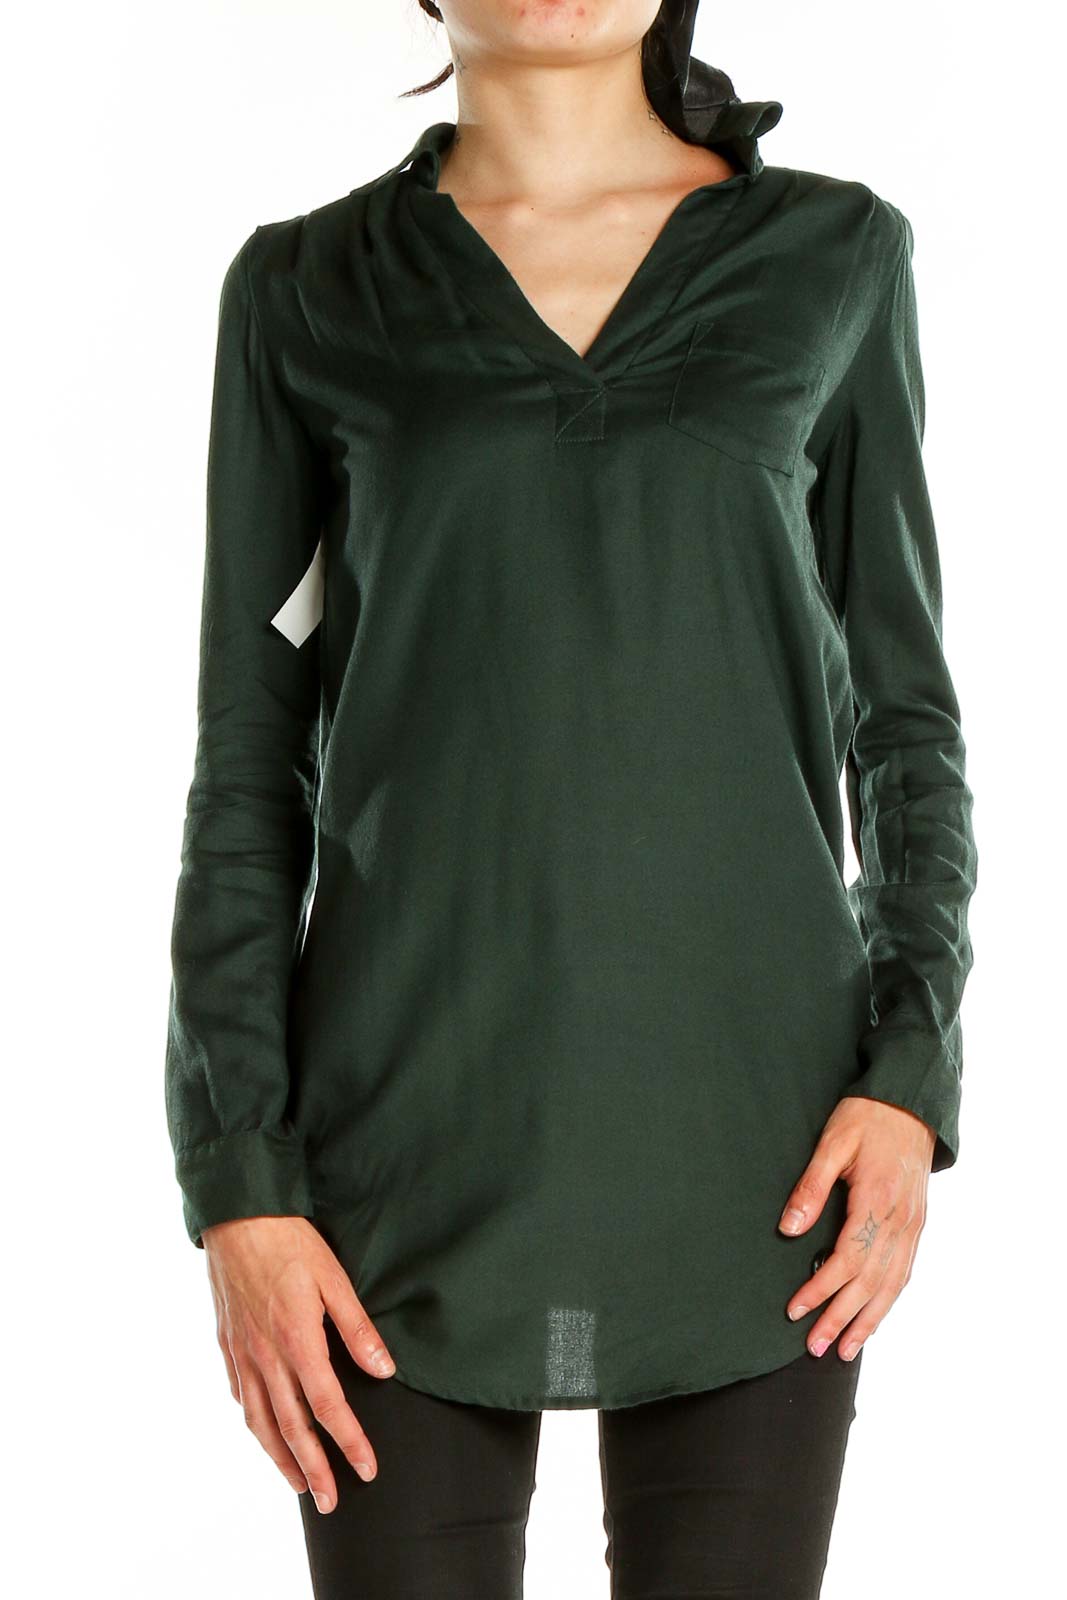 Green Tunic Top Front